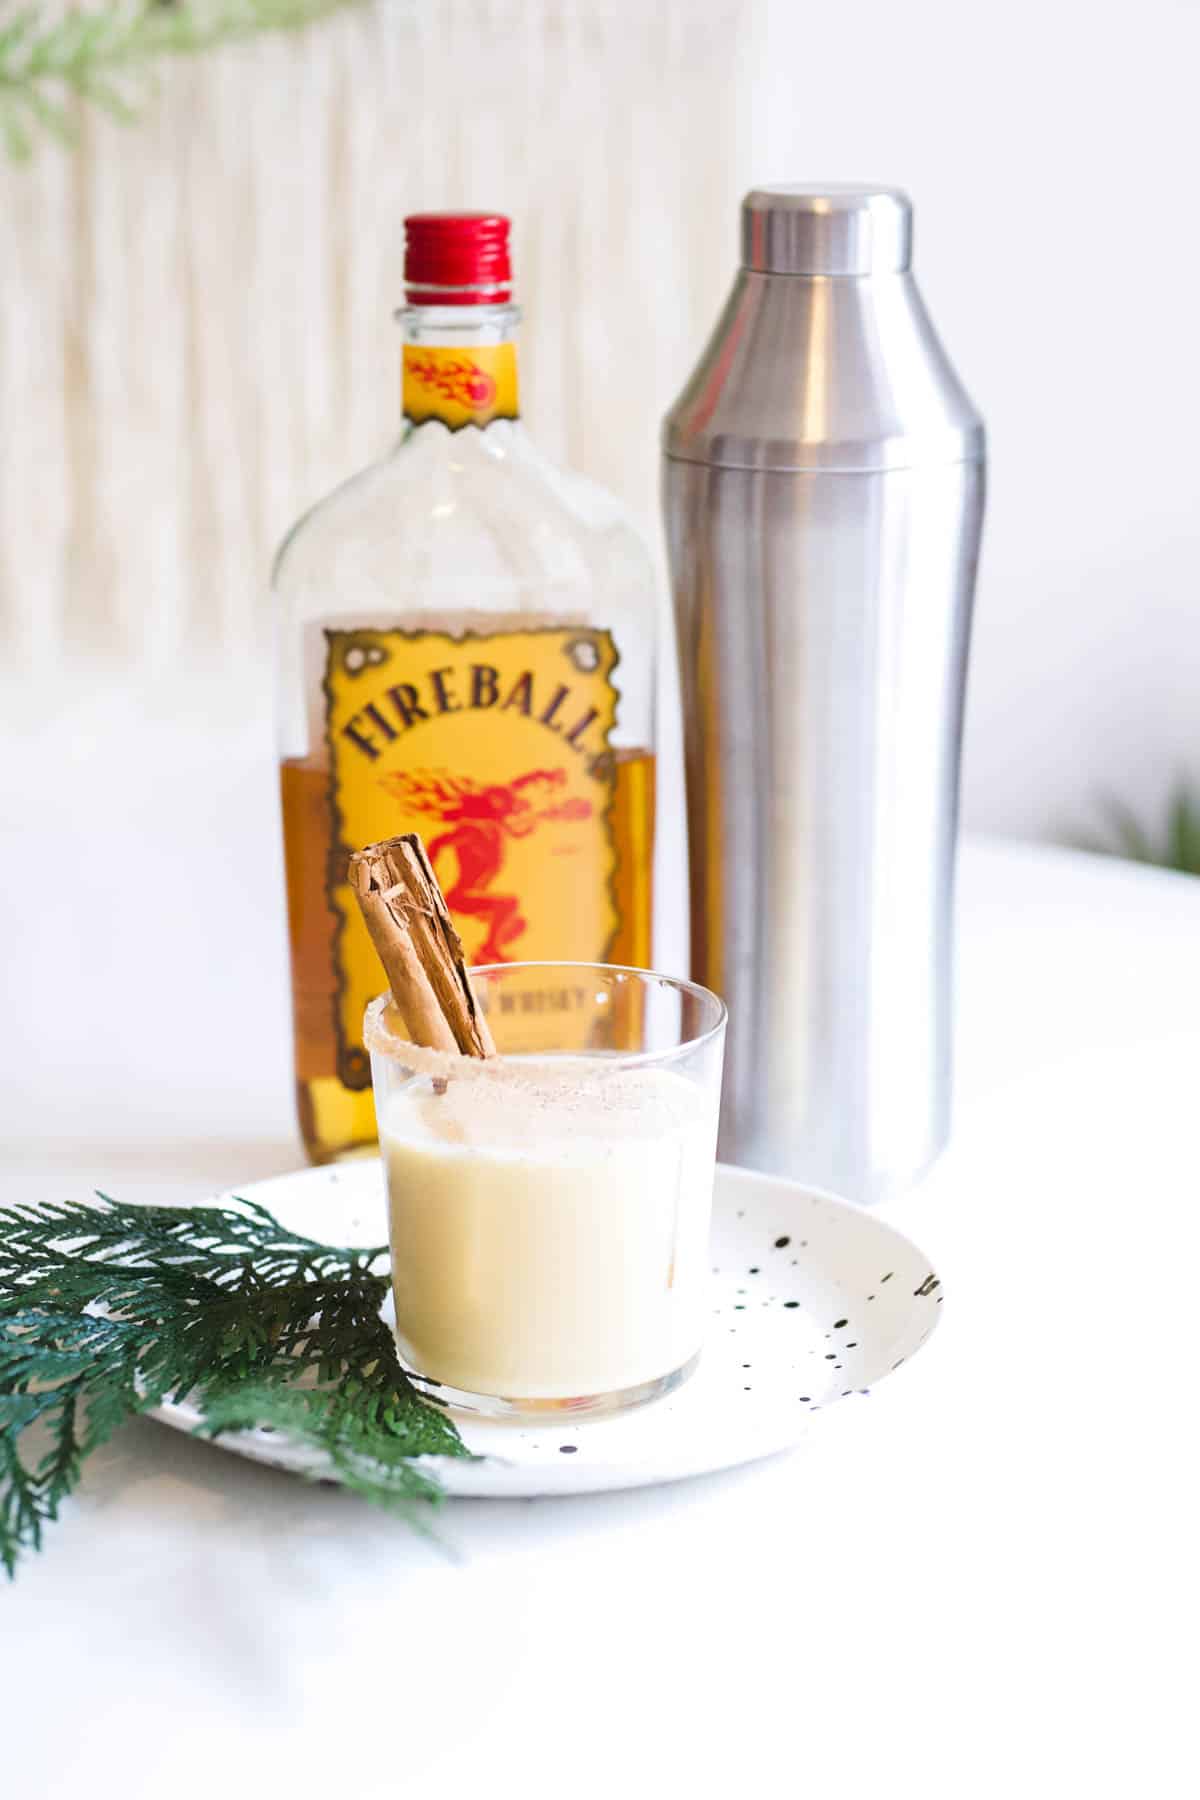 Cocktail with Fireball and Eggnog in a glass next to a cocktail shaker and bottle of Fireball.